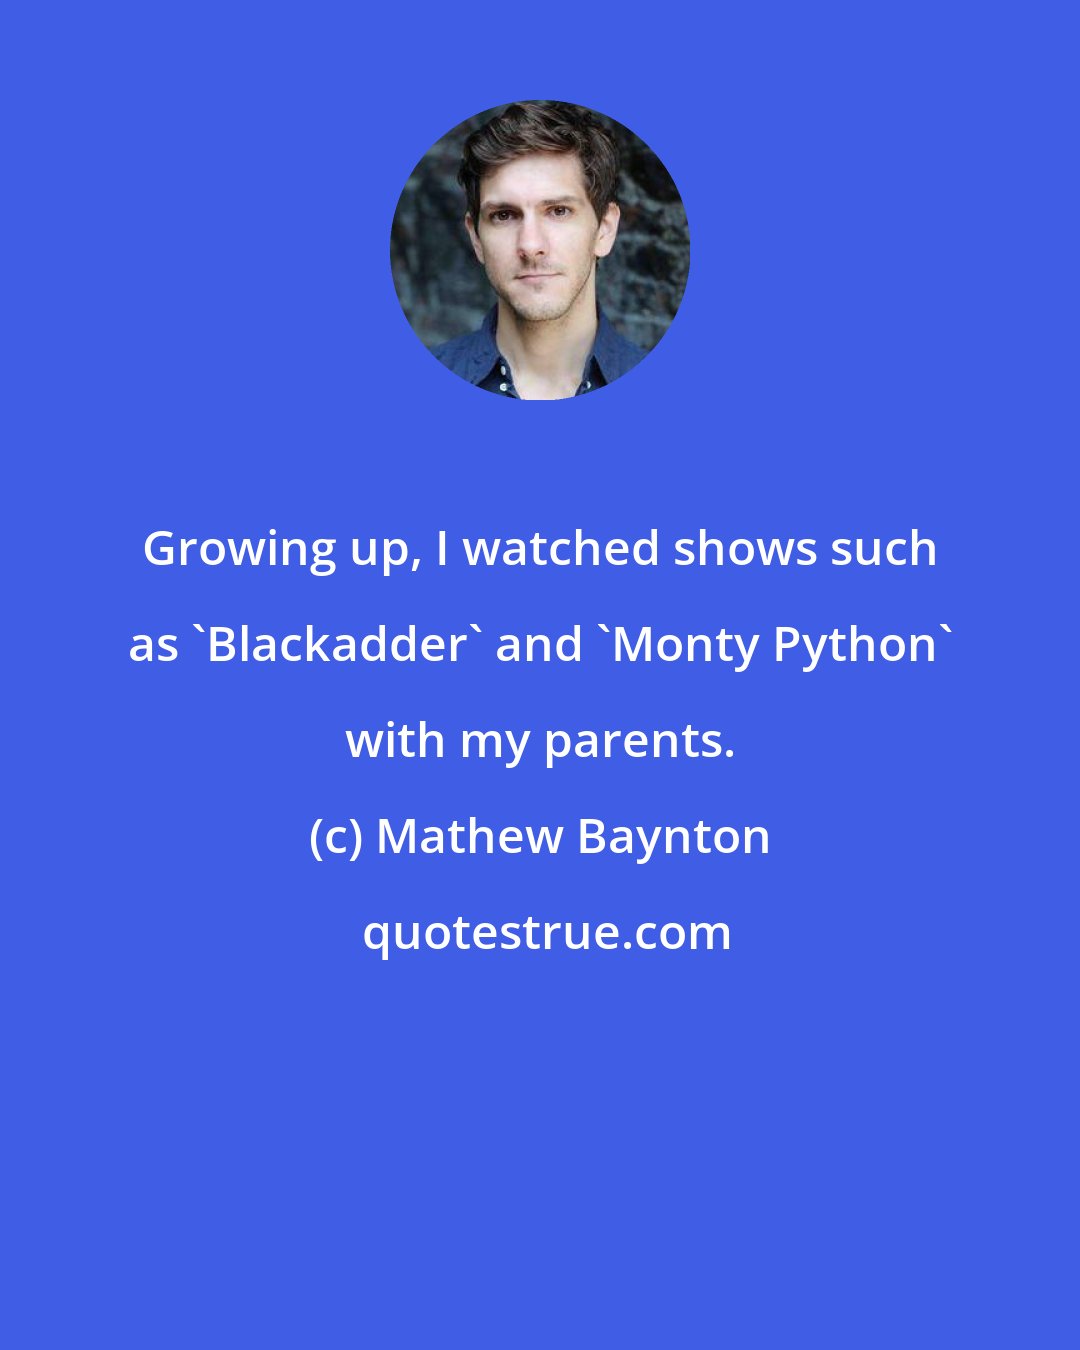 Mathew Baynton: Growing up, I watched shows such as 'Blackadder' and 'Monty Python' with my parents.